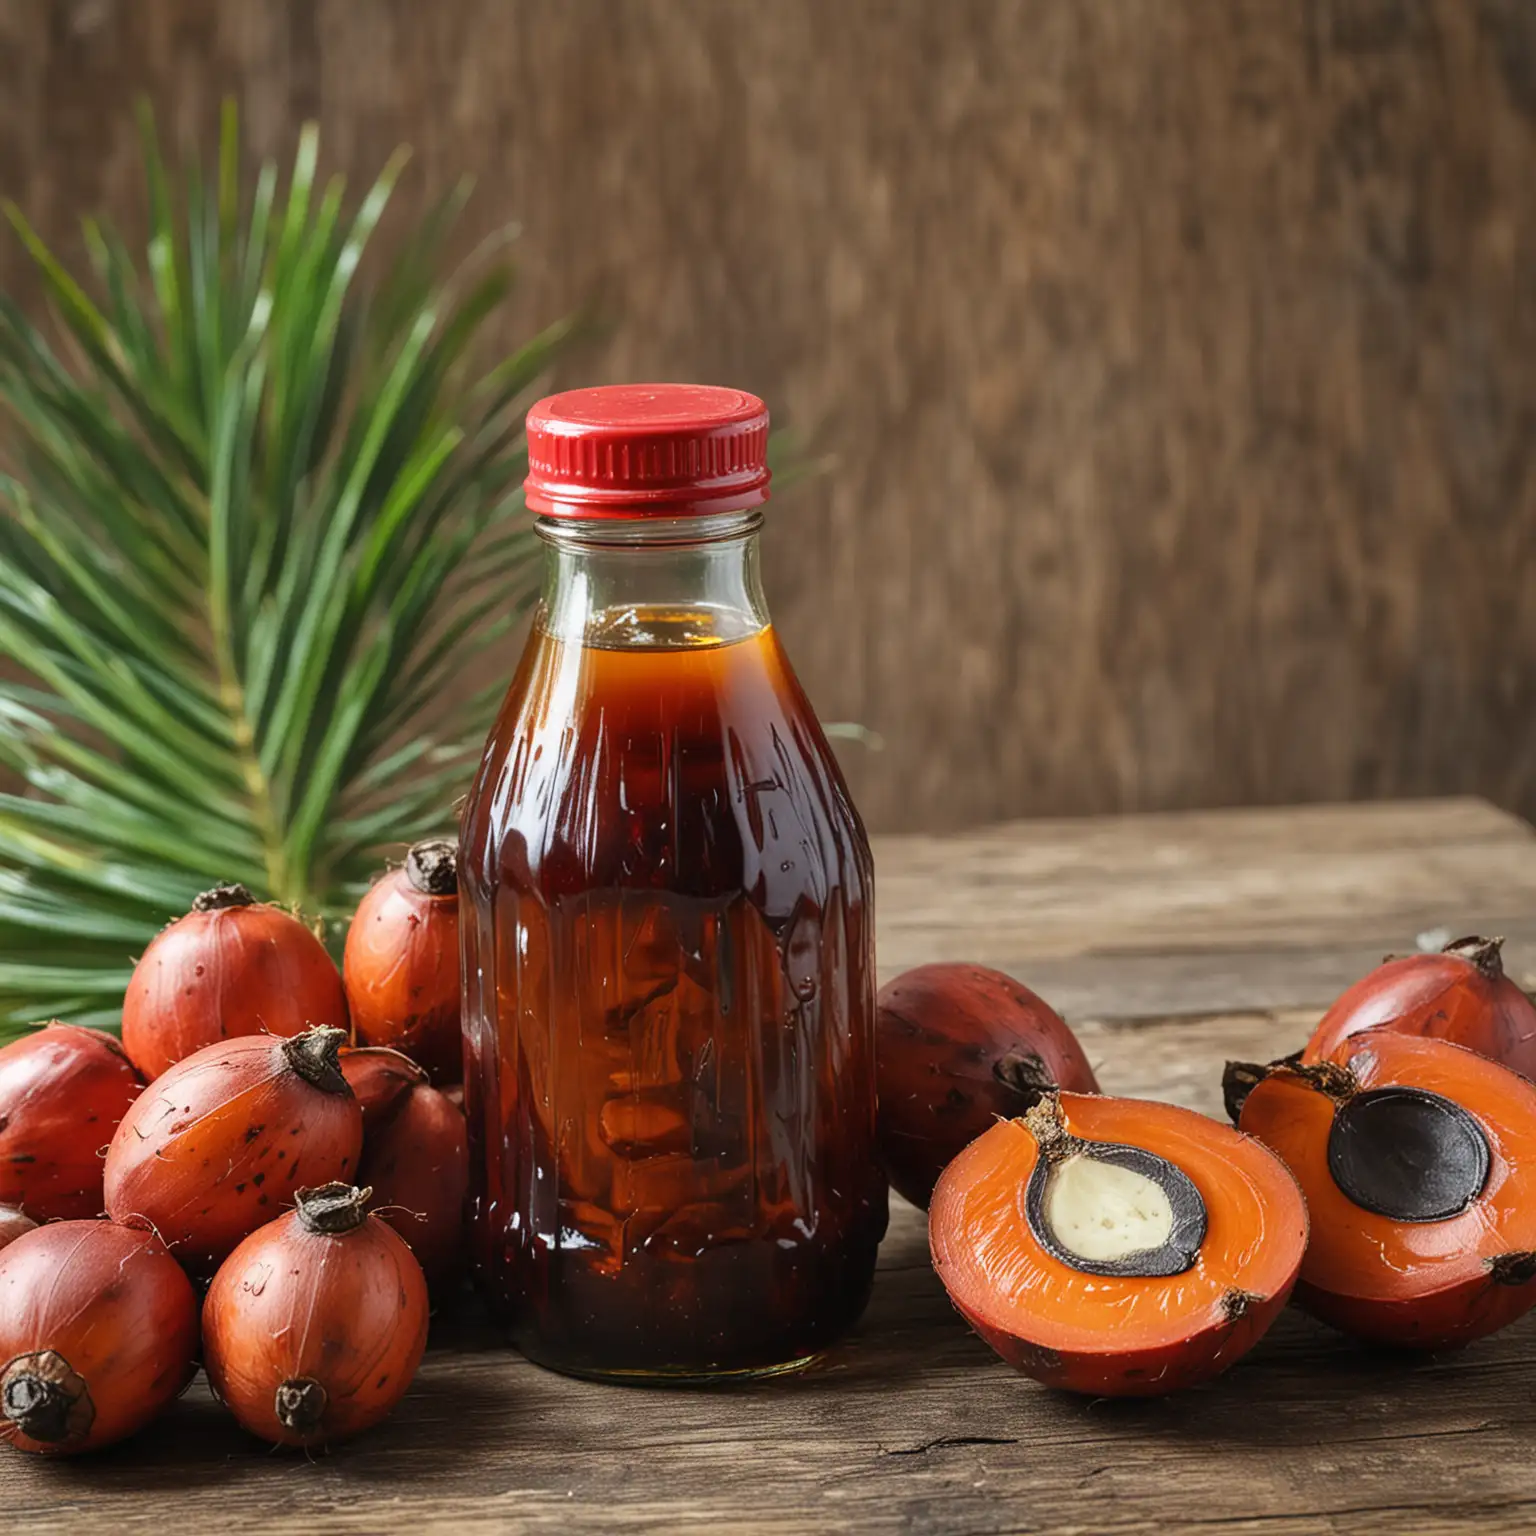 Palm fruit cut in half with palm oil in a bottle in view on a table 